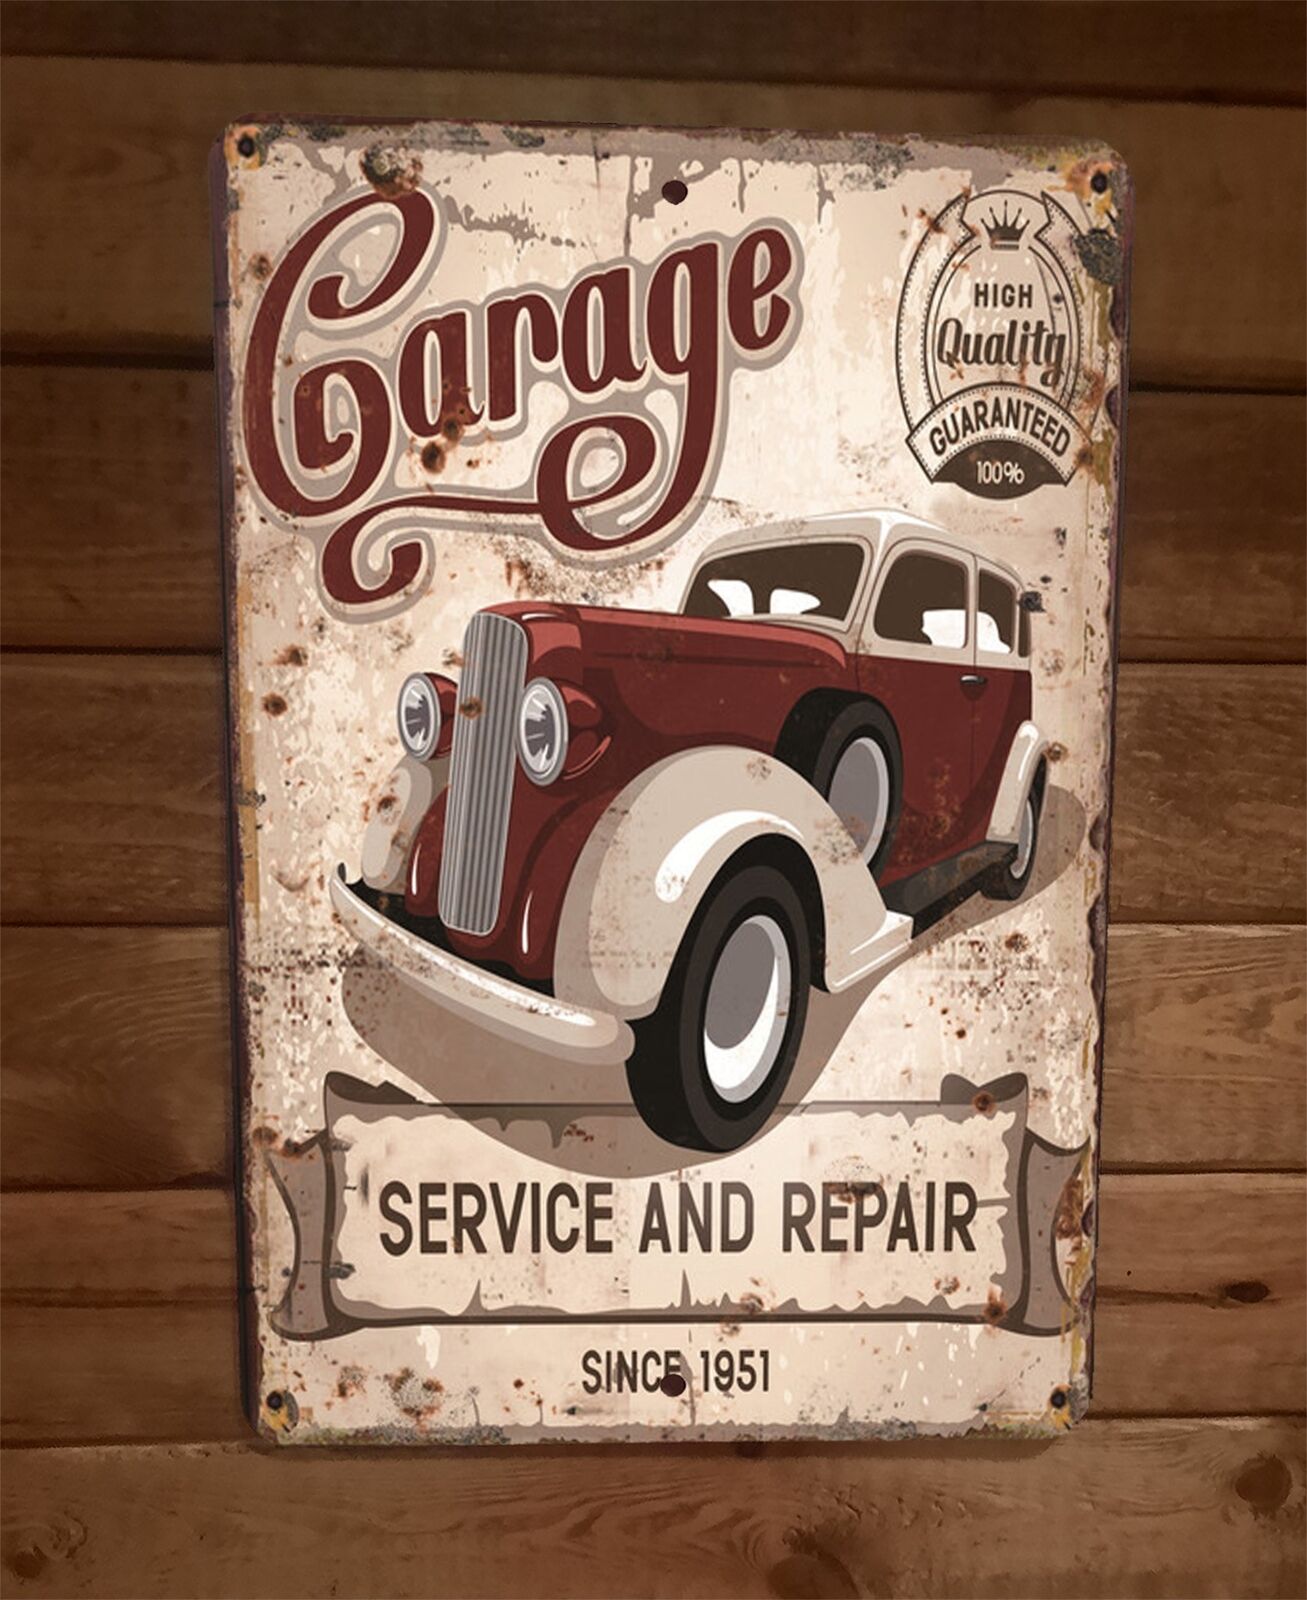 Since 1951 Service and Repair 8x12 Metal Wall Sign Garage Poster